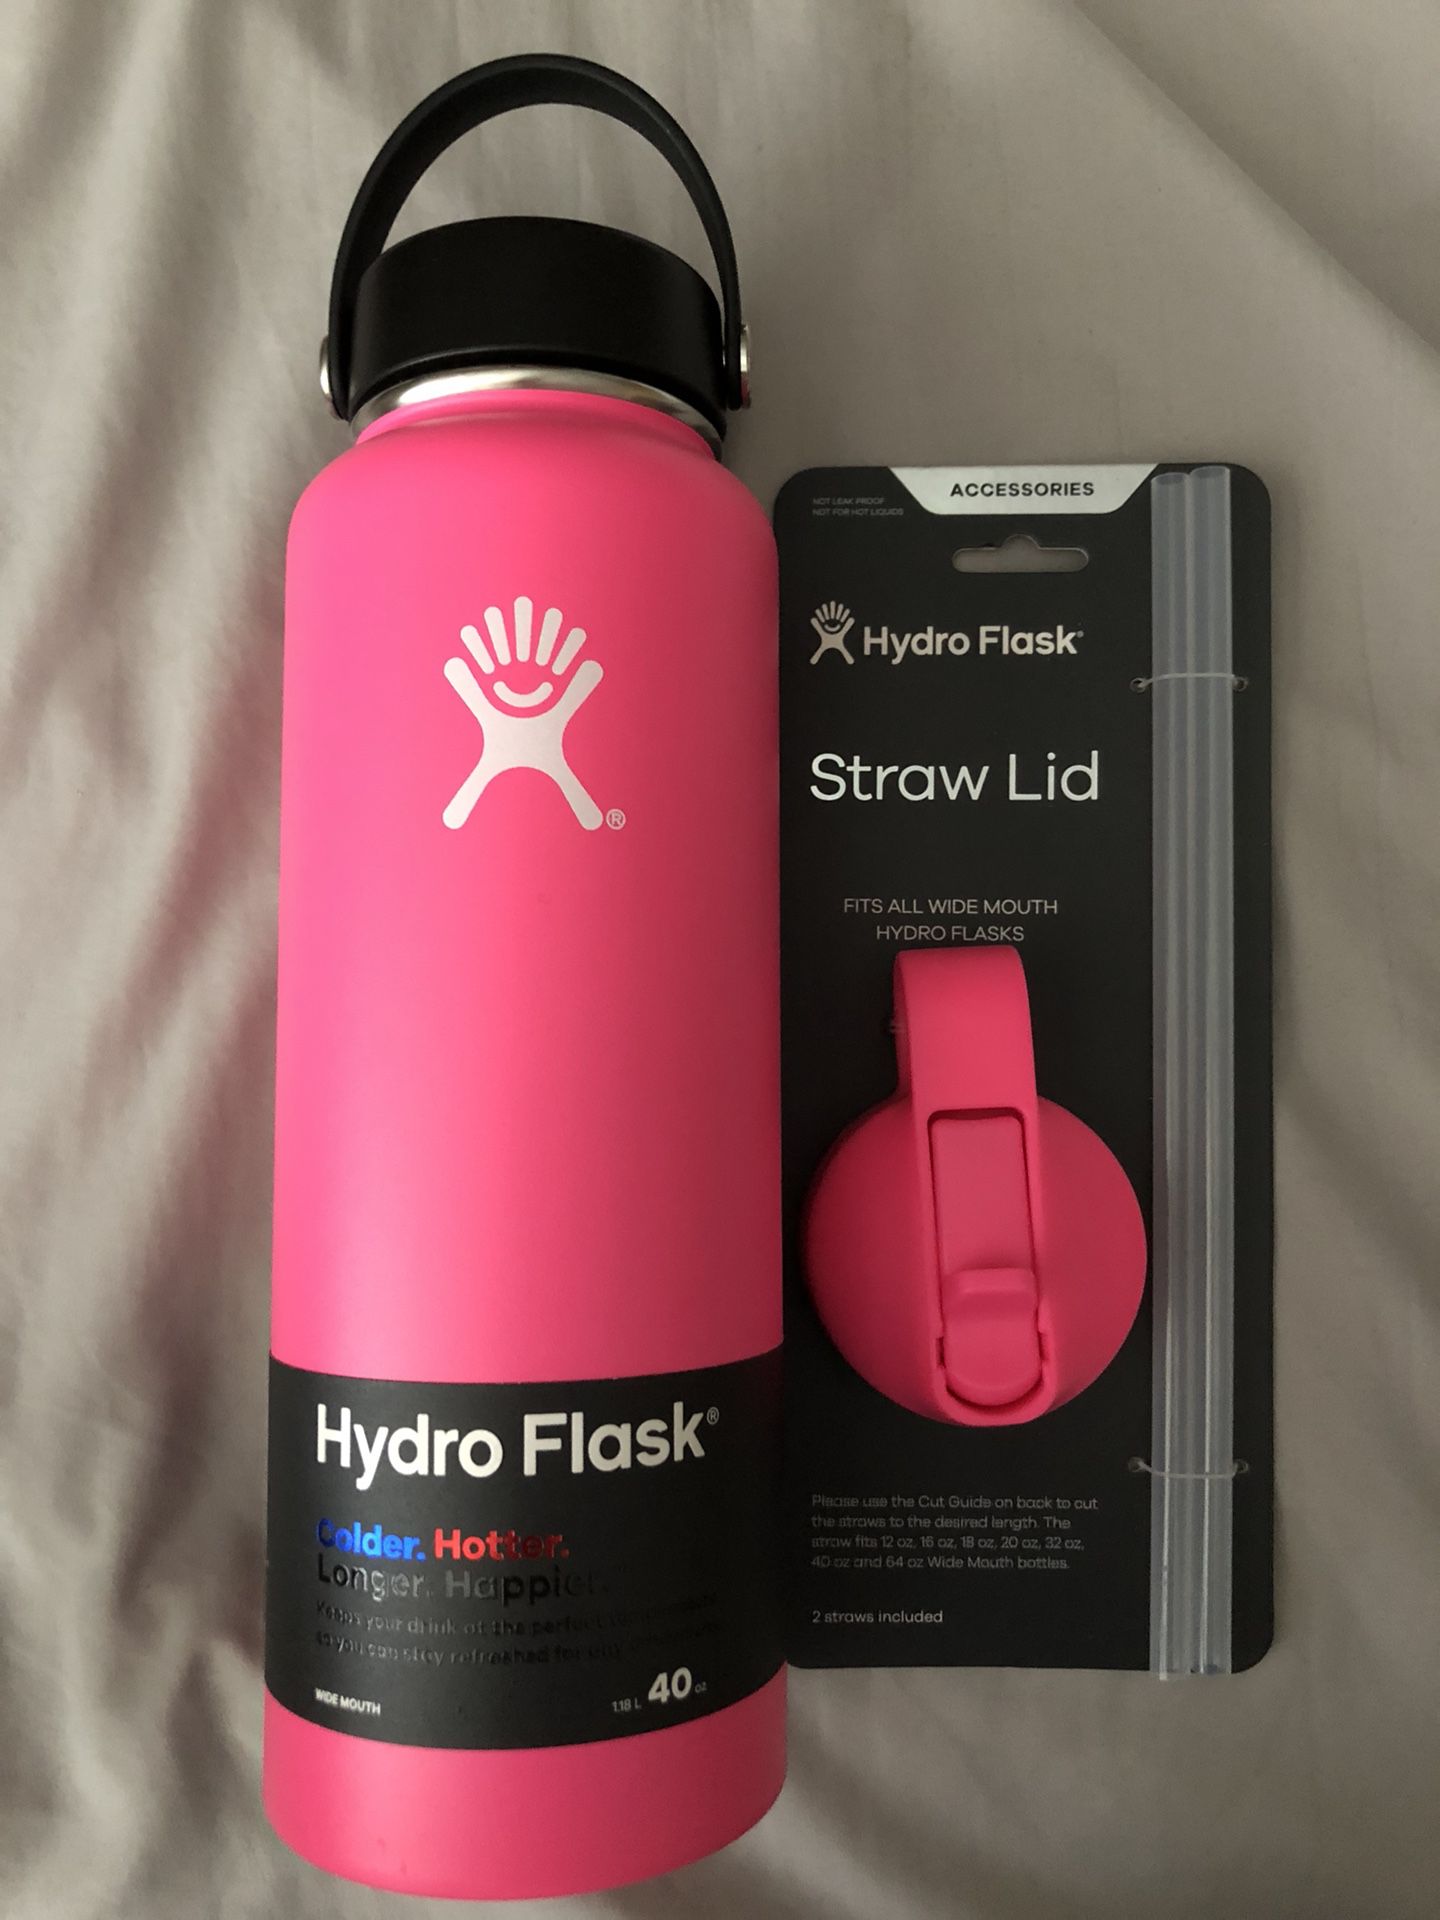 Brand New Pink 40oz Hydro flask with Straw Lid for Sale in Brea